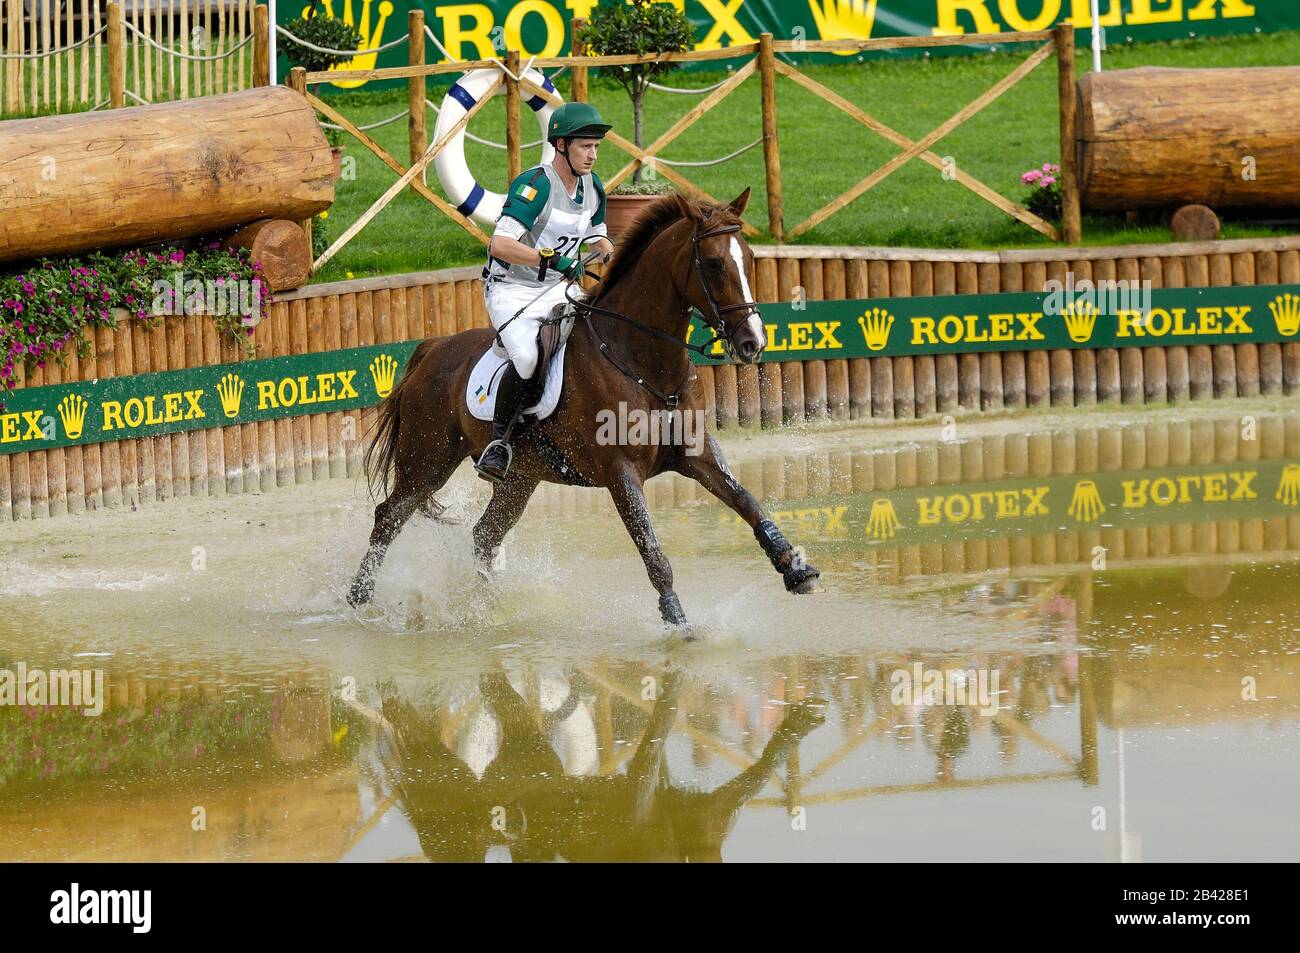 Niall Griffin (IRE) riding Lorgaine - World Equestrian Games, Aachen, - August 26, 2006, Eventing Cross Country Stock Photo